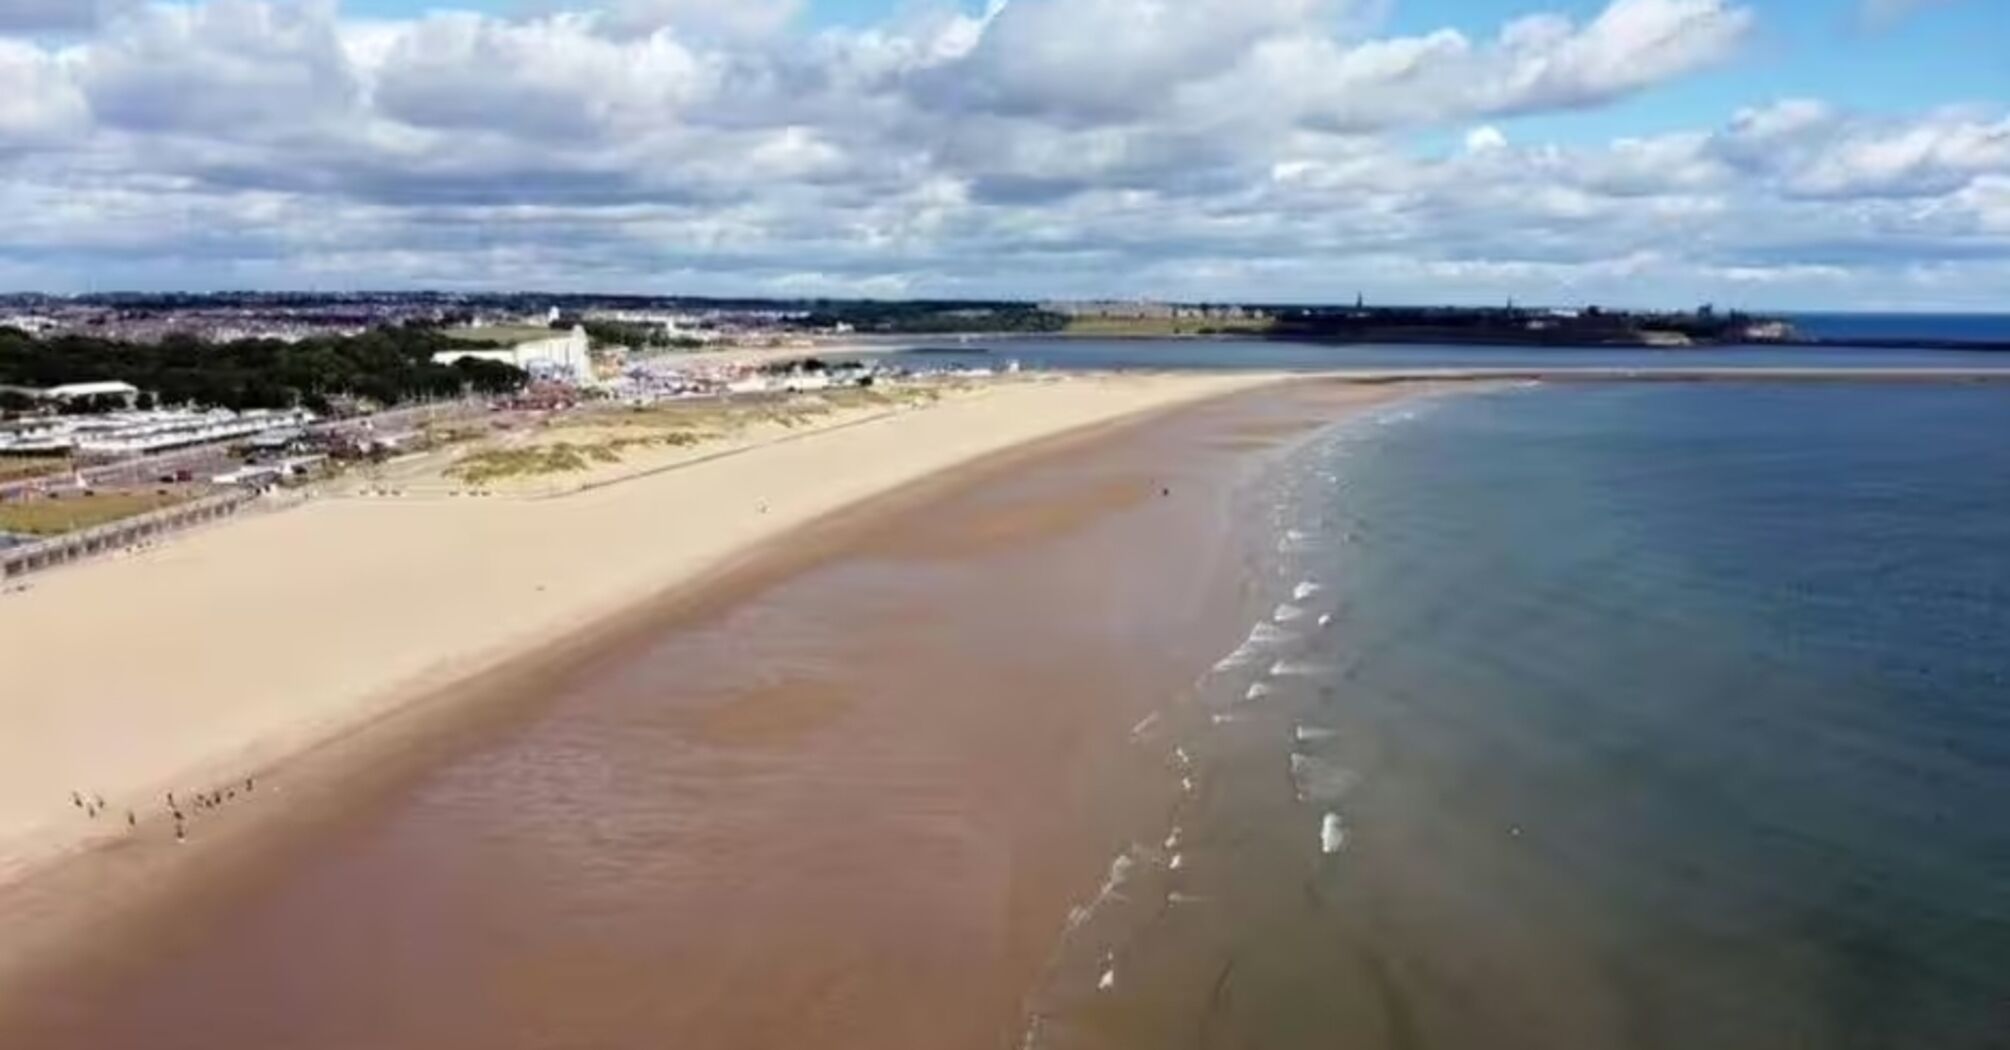 Many people come to the UK's 'second worst seaside town' for its amazing sandy beach